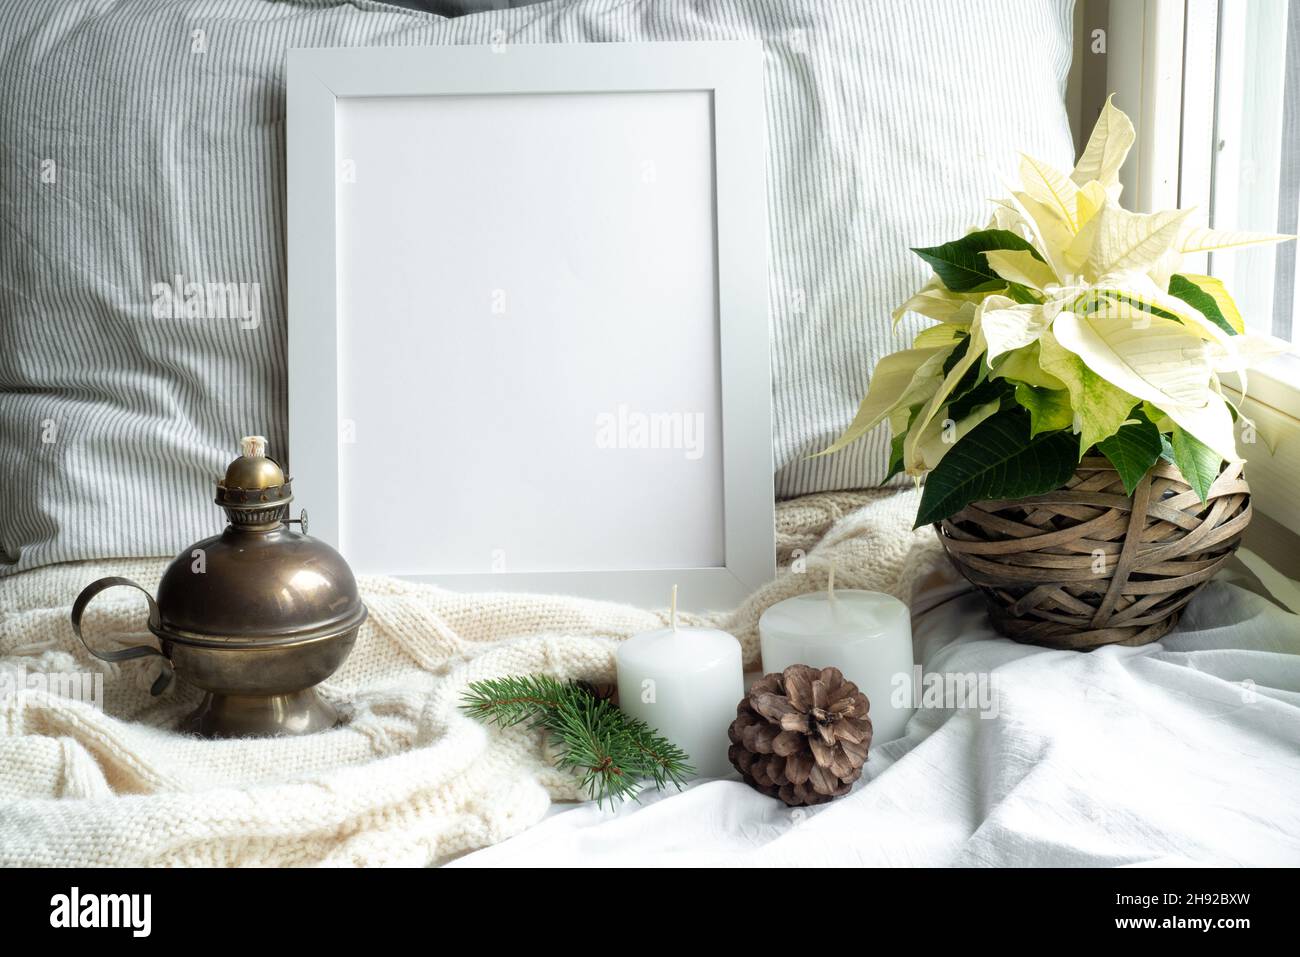 Cozy winter home interior scene.Christmas composition near the window.Blank white pictur frame mockup, white poinsettia, oil lamp, candles, gift box.M Stock Photo